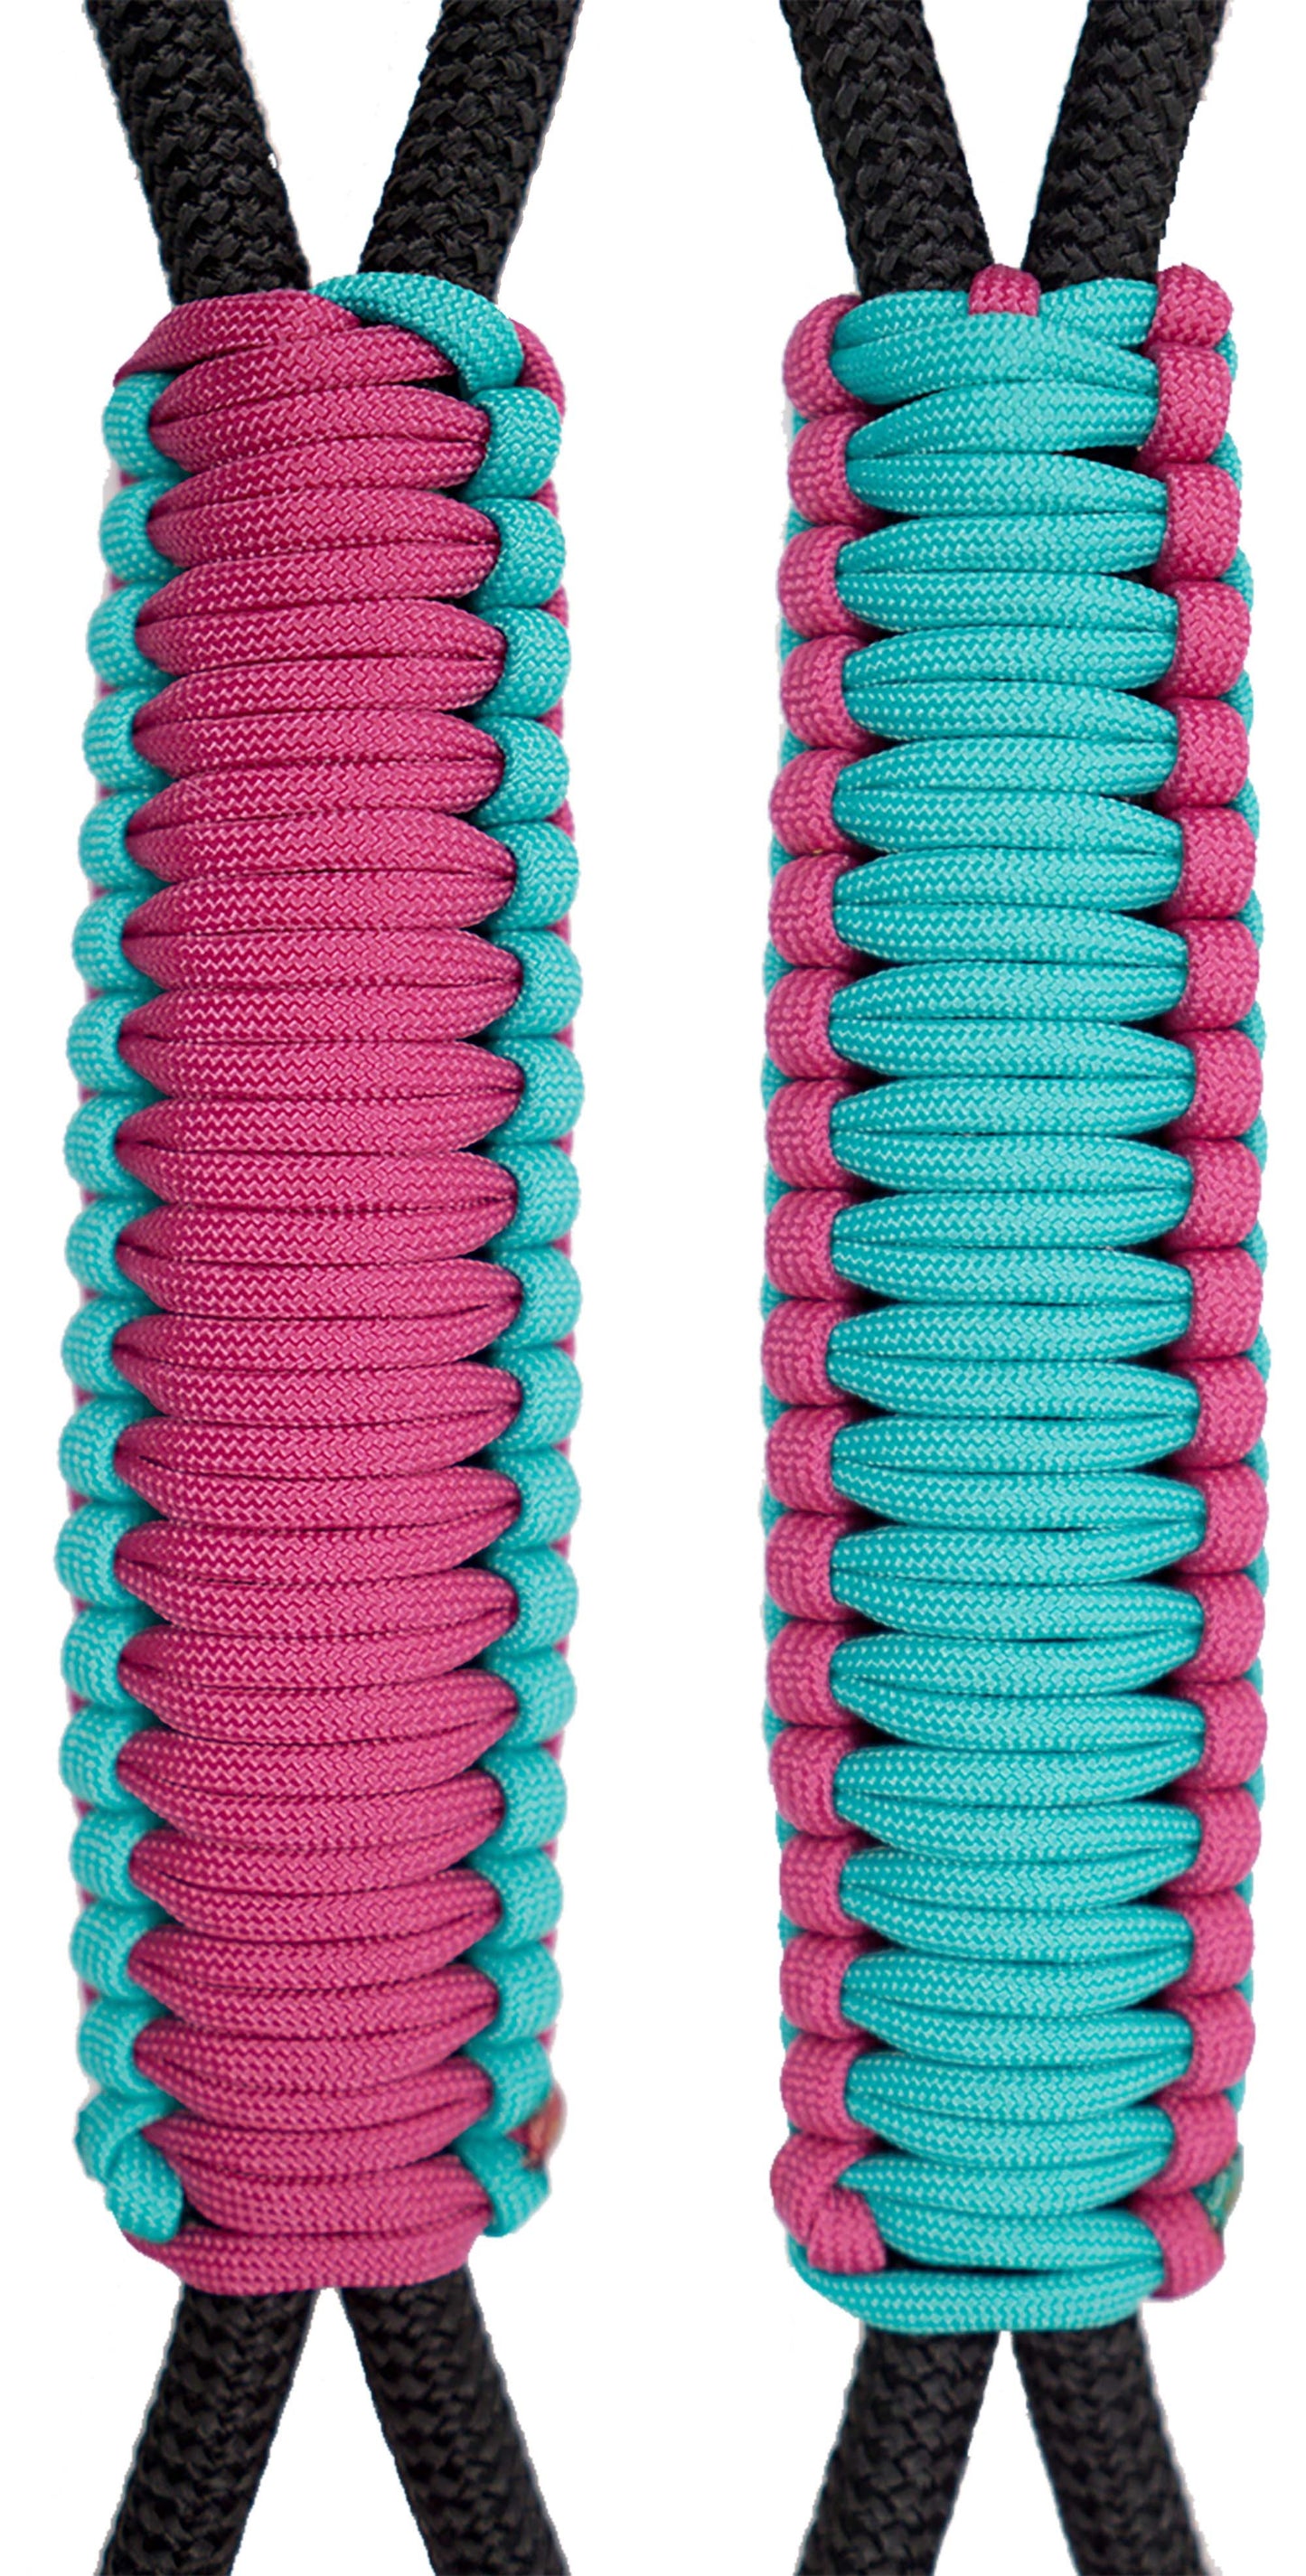 Turquoise & Fuchsia C015C010 Paracord Handmade Handles for Stainless Steel Tumblers - Made in USA!